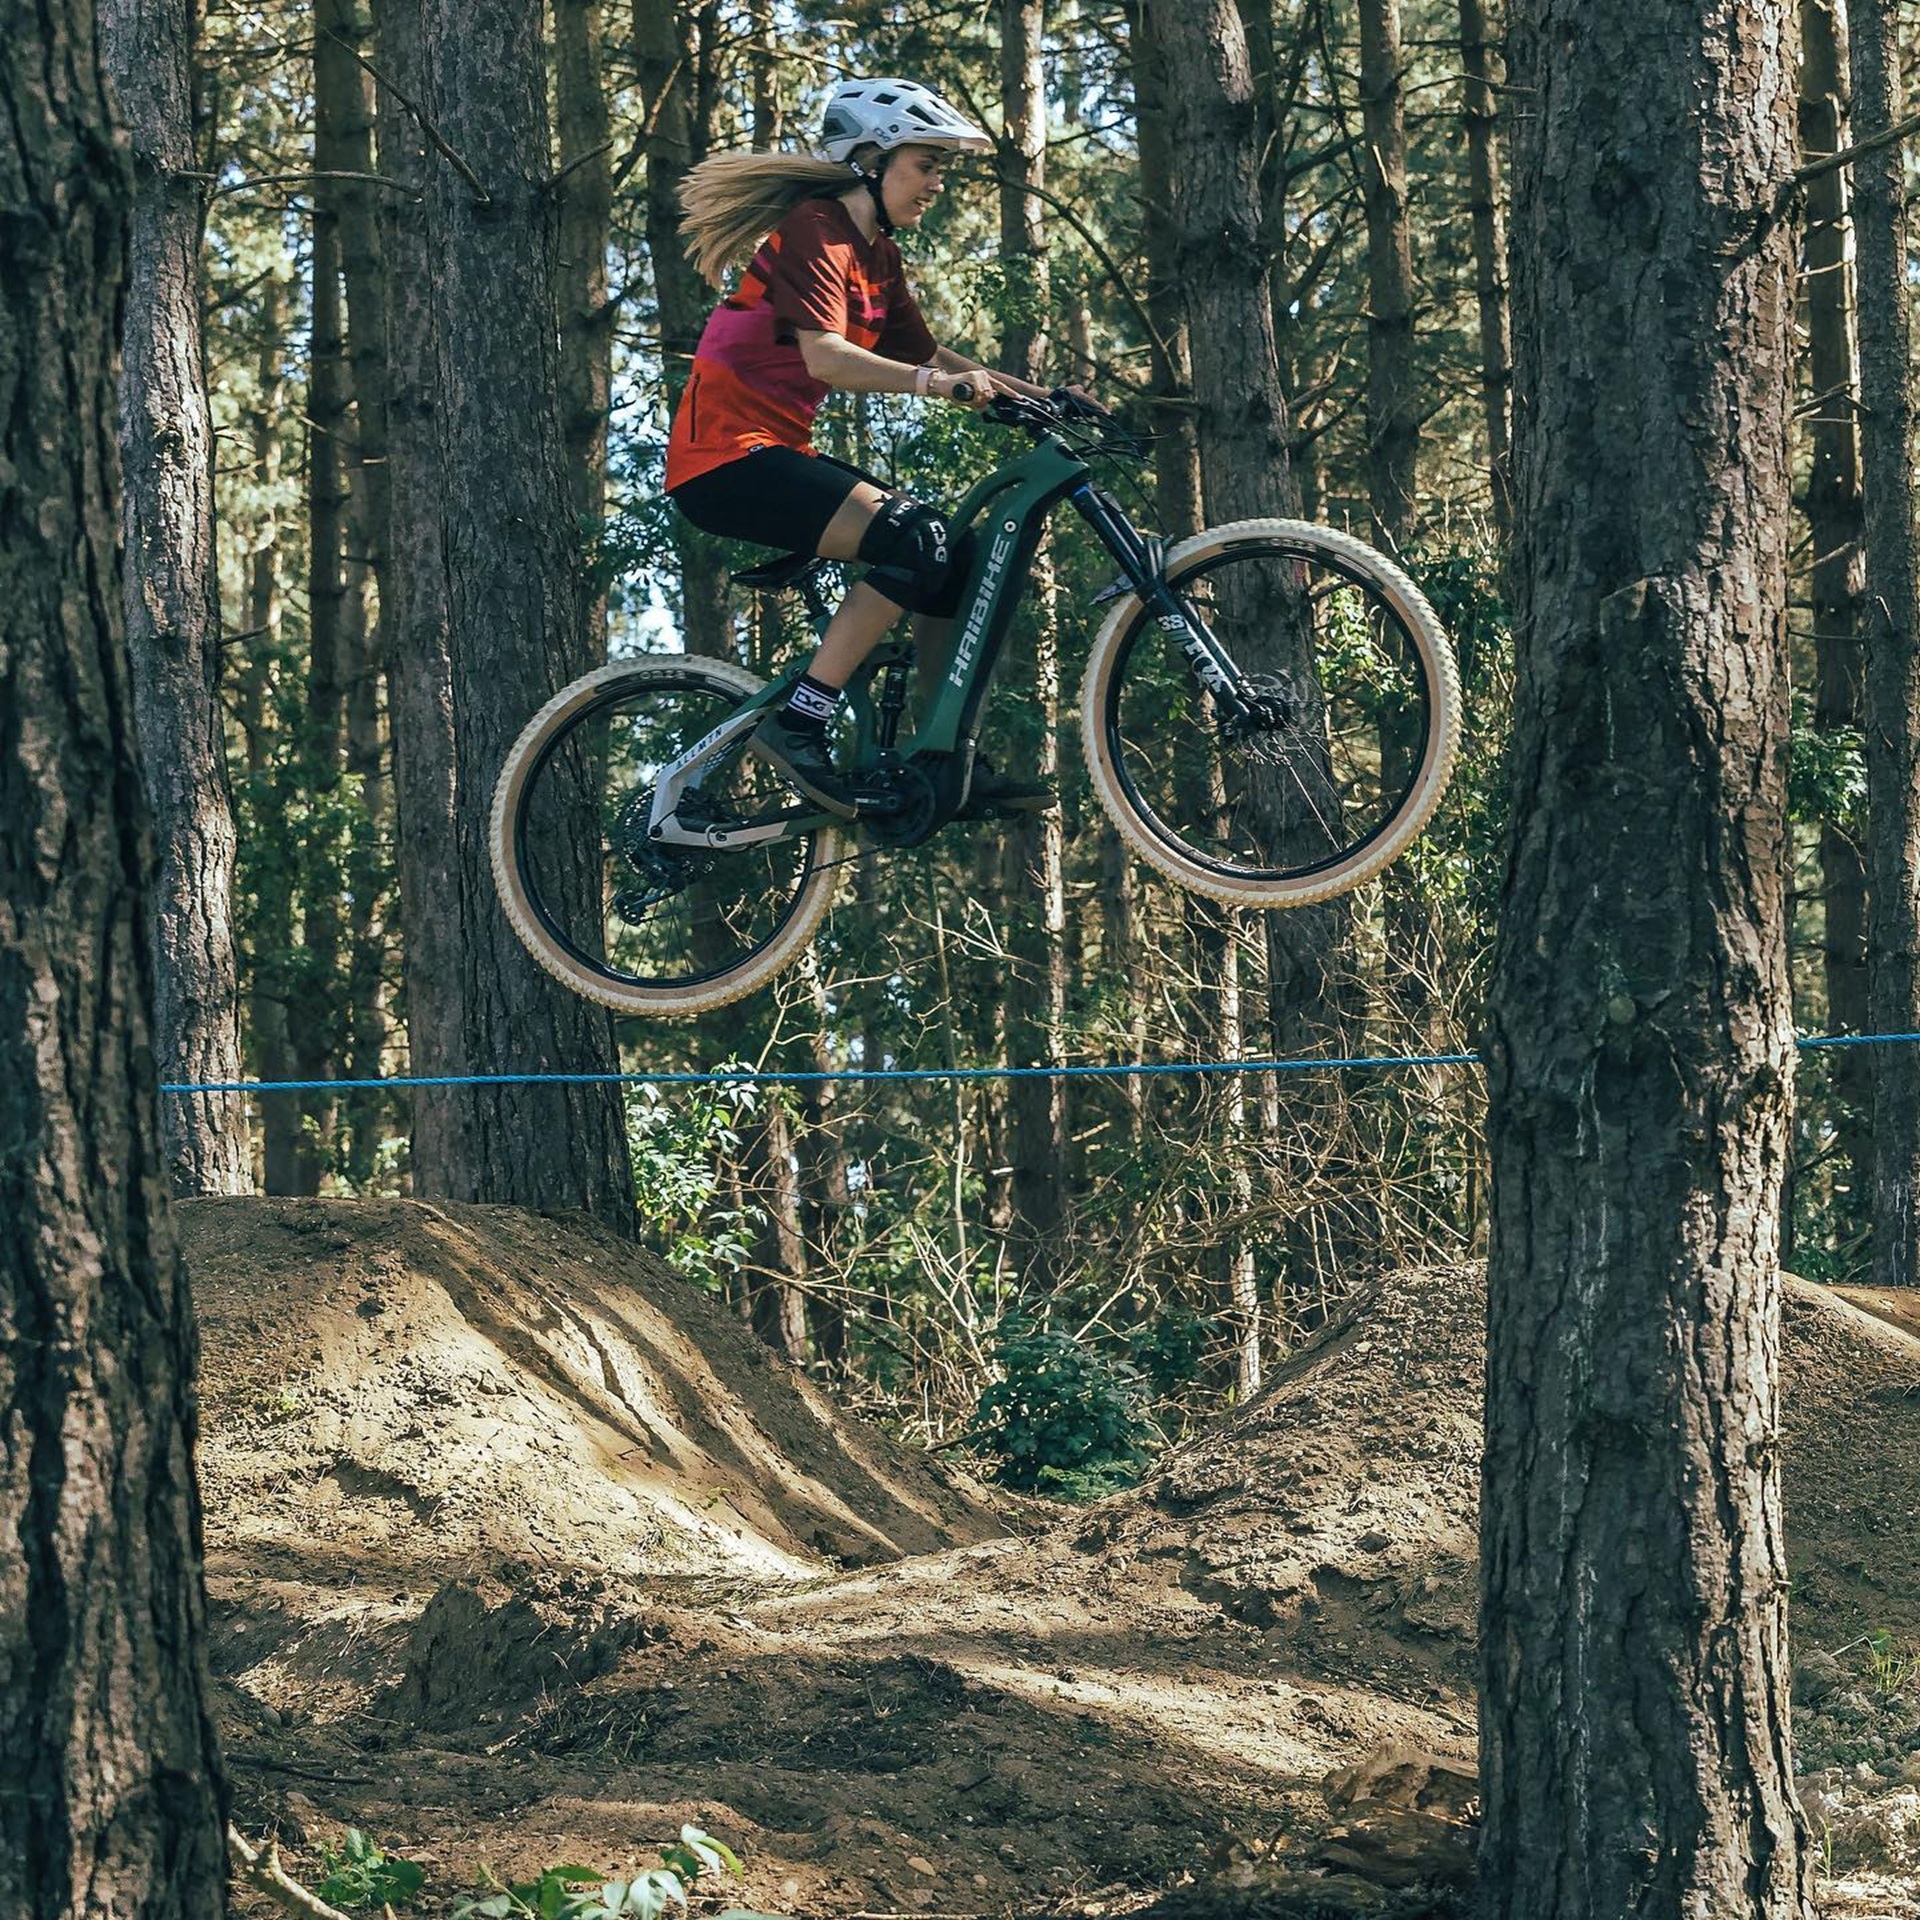 Haibike Hero Kara Beal jumping on a forest MTB track with her AllMtn 6